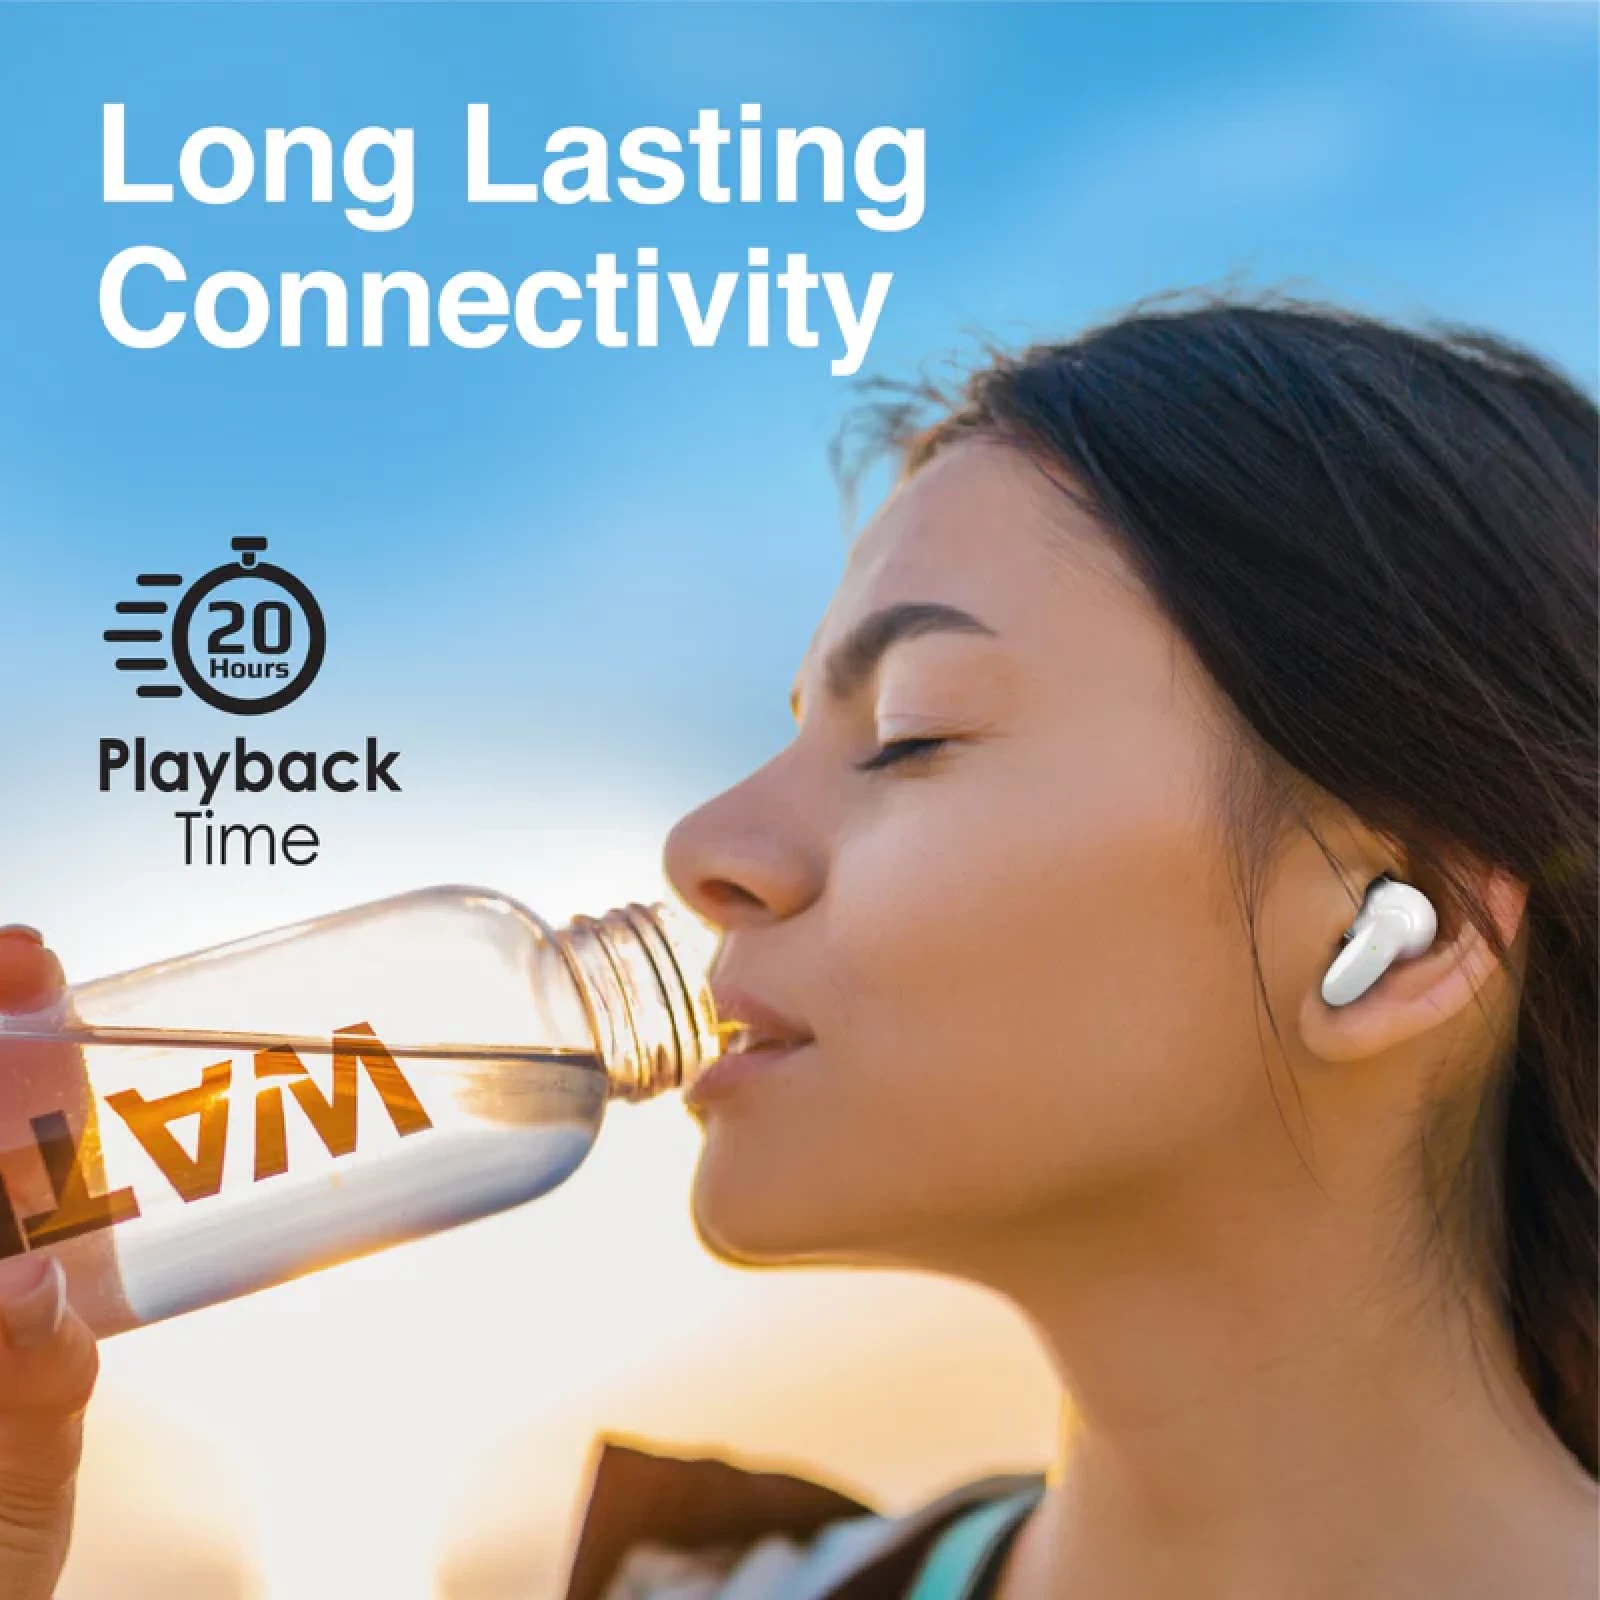 Безжични слушалки ProMate LUSH, Acoustic In-Ear TWS Bluetooth v5.1 Earphone • 19-Hour Playback • Ergonomic Fit Earbuds • Stable Connectivity, Бял